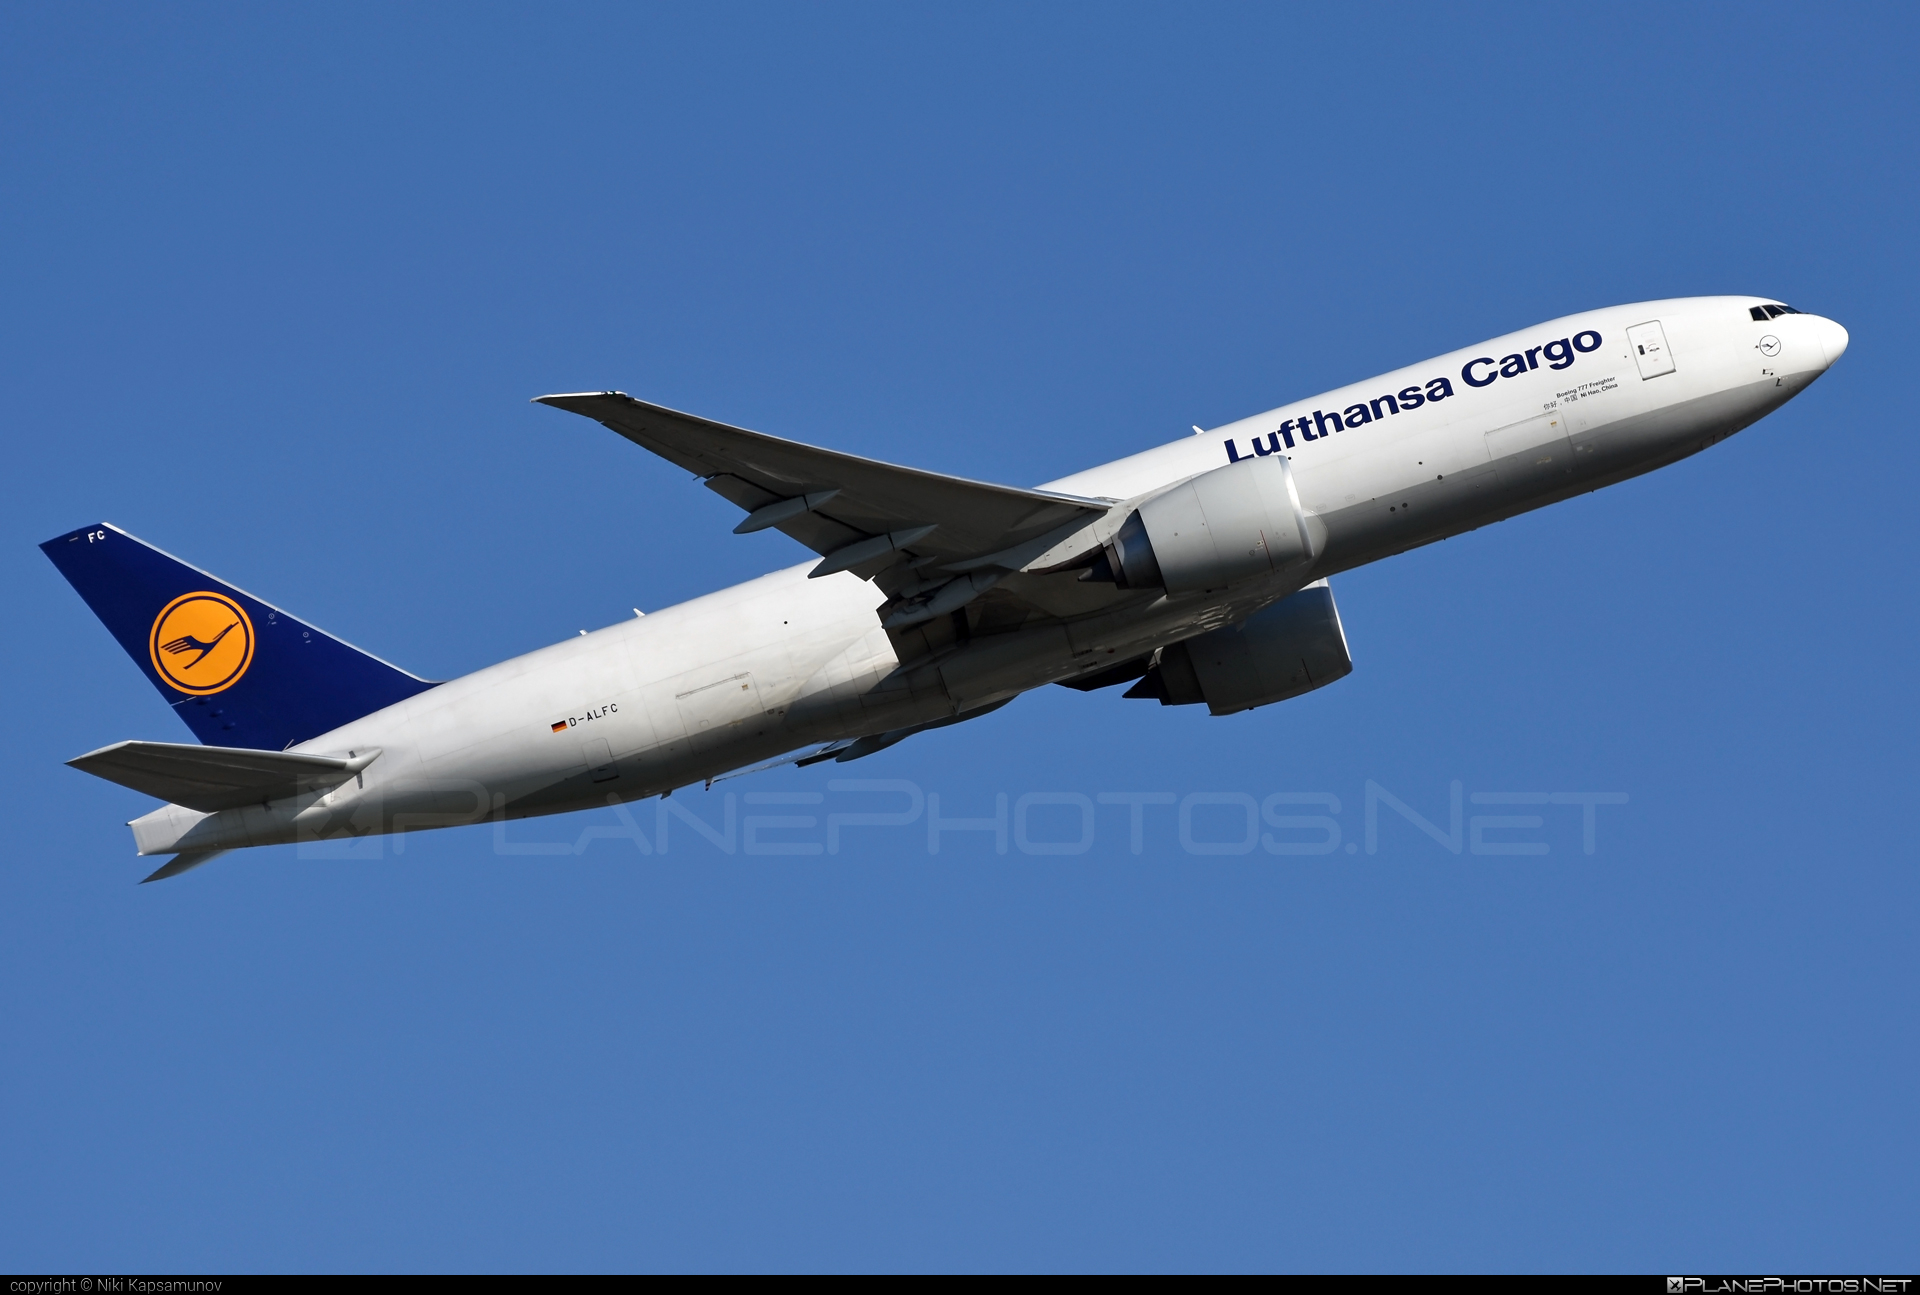 Boeing 777F - D-ALFC operated by Lufthansa Cargo #b777 #b777f #b777freighter #boeing #boeing777 #lufthansa #lufthansacargo #tripleseven